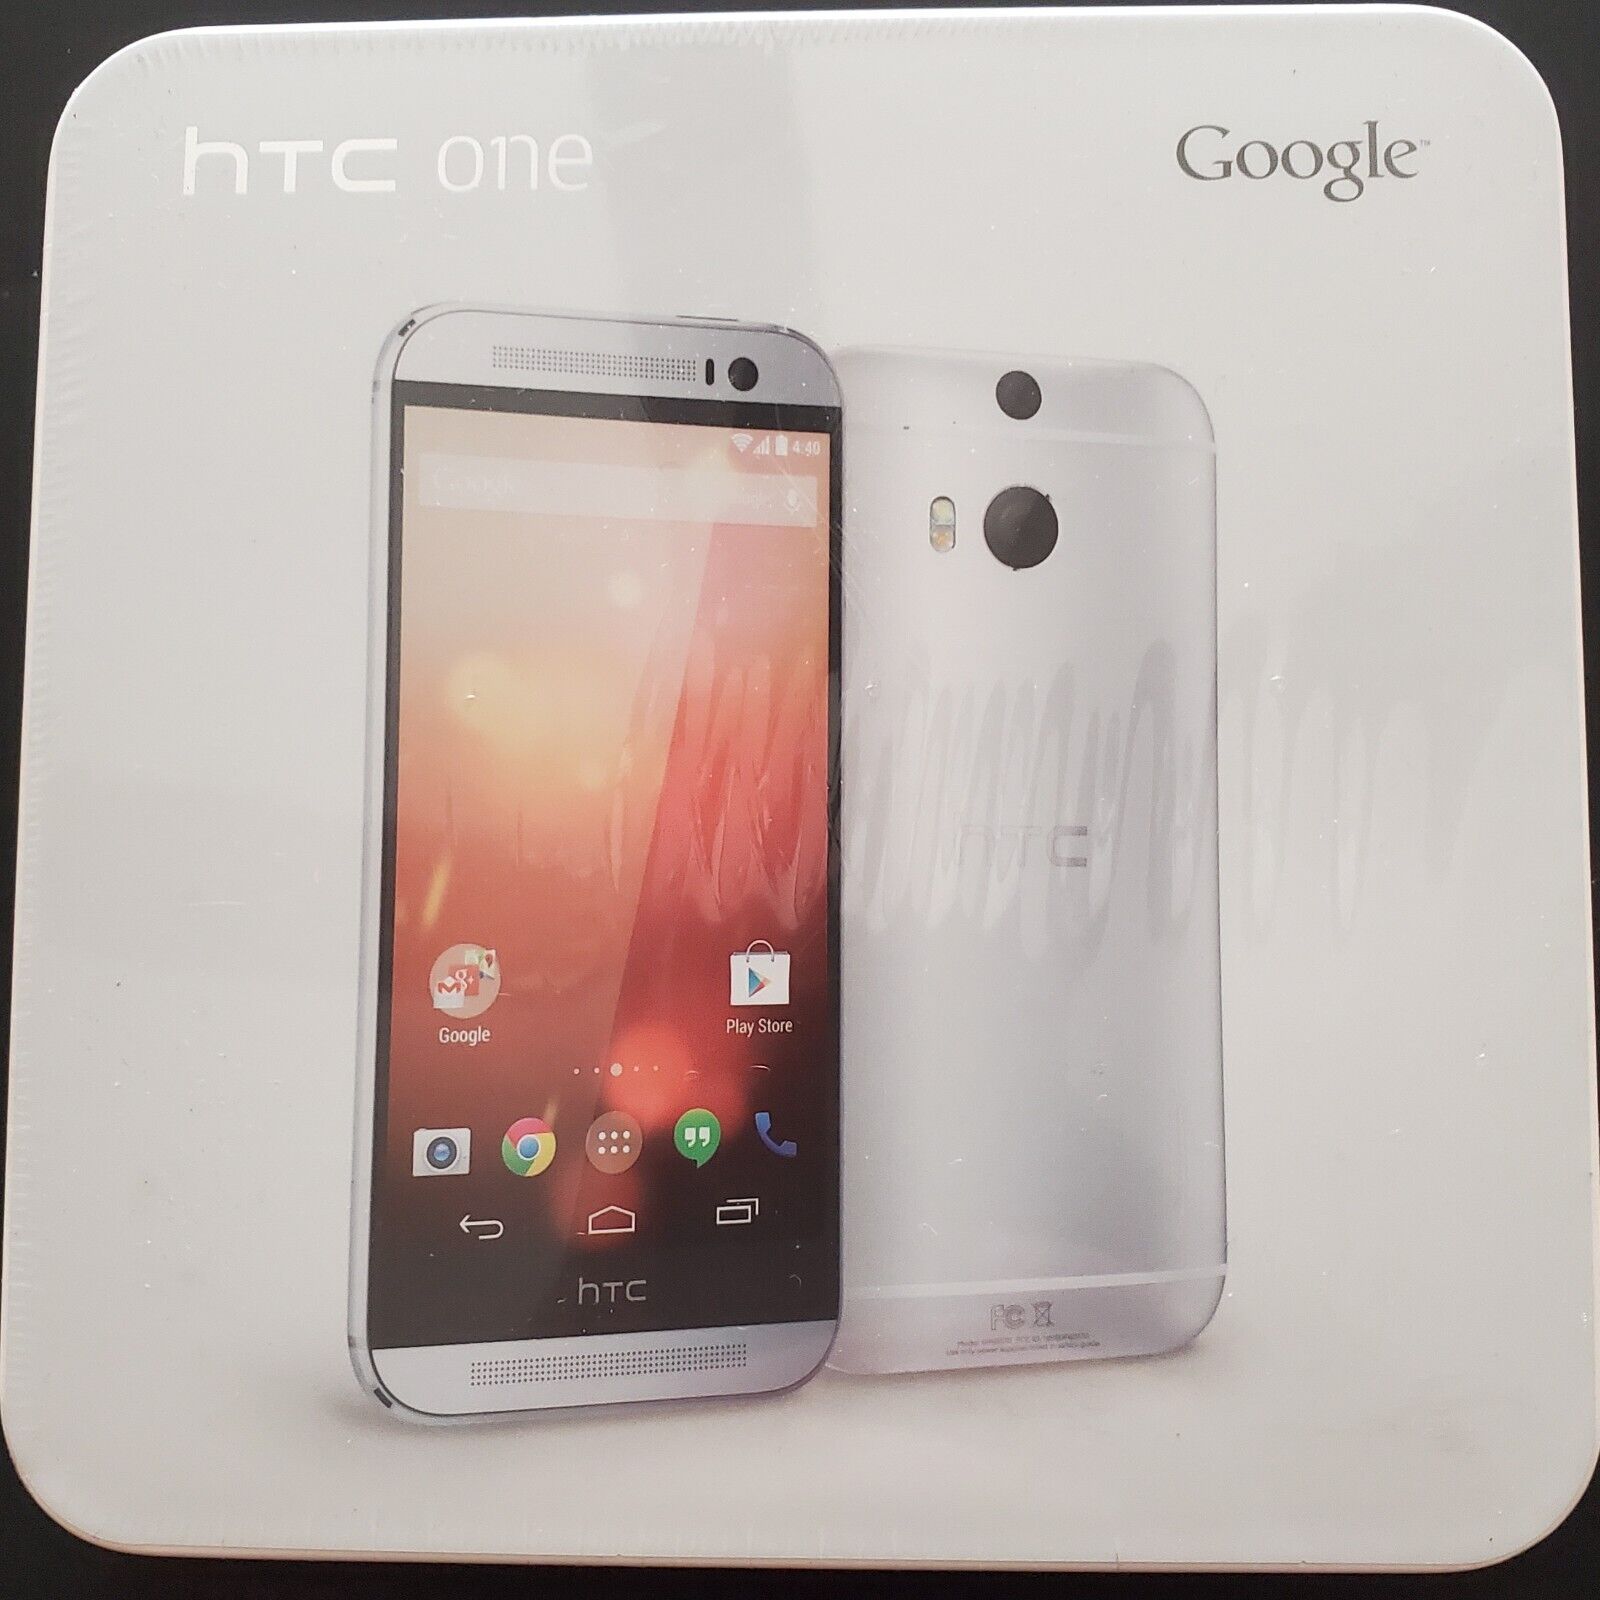 The Price of HTC One M8 – 32GB – Glacial Silver (Unlocked) Smartphone (Google Play Edition) | Google Pixel Phone